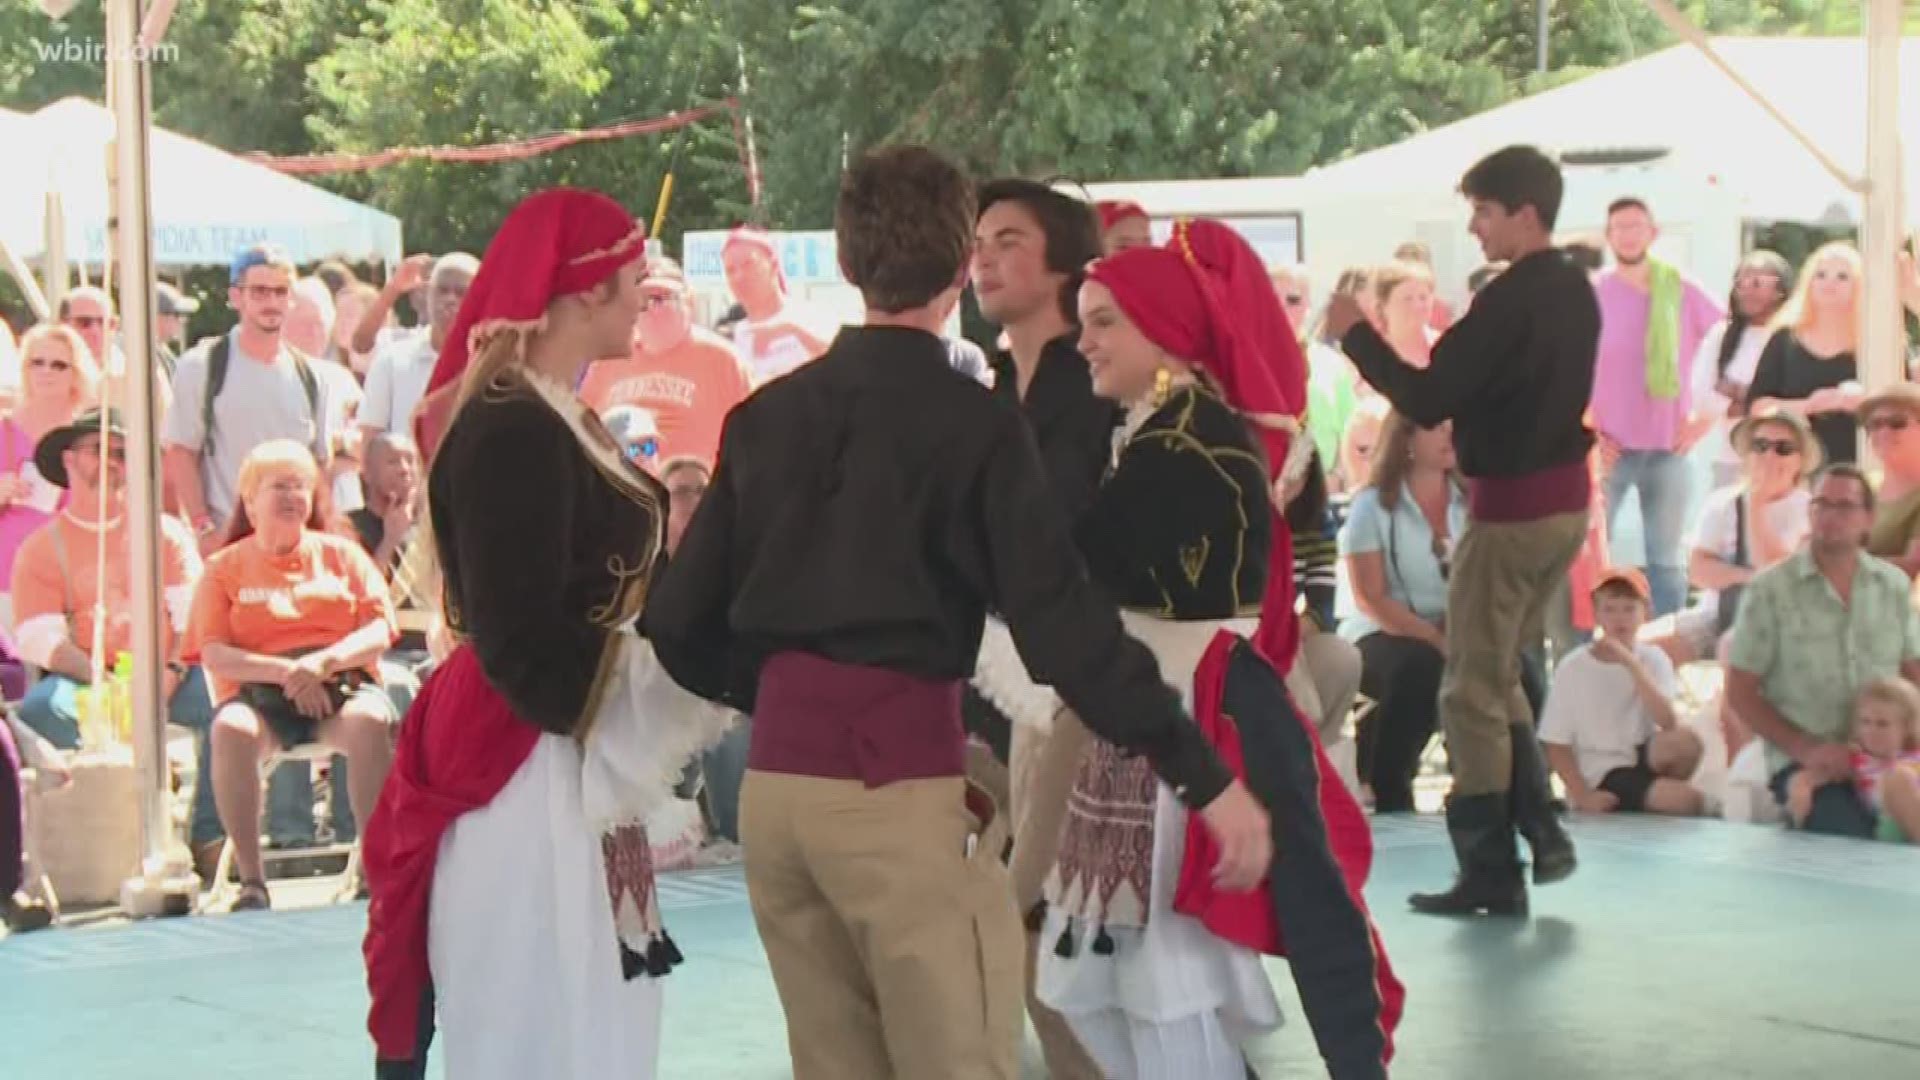 Greek Fest kicks off in dancing style while a Greek Church sees new renovations.